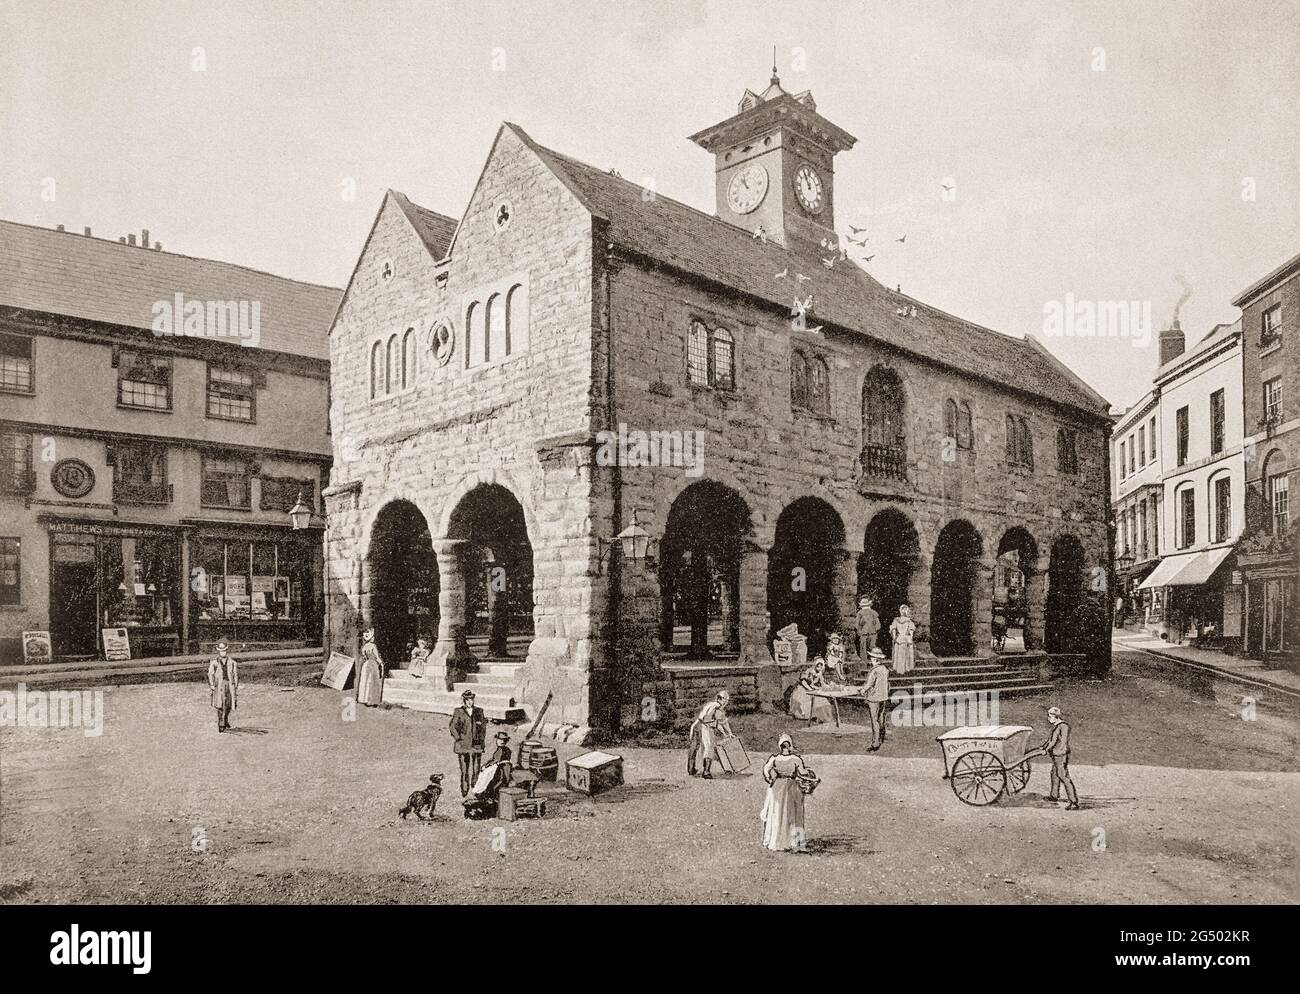 A late 19th Century view of the Market House in the town centre of Ross-on-Wye, a market town in south-eastern Herefordshire, England. It was built between 1650 and 1654 to replace a probably wooden Booth Hall. The upper storey now houses an Arts and Crafts centre. Stock Photo